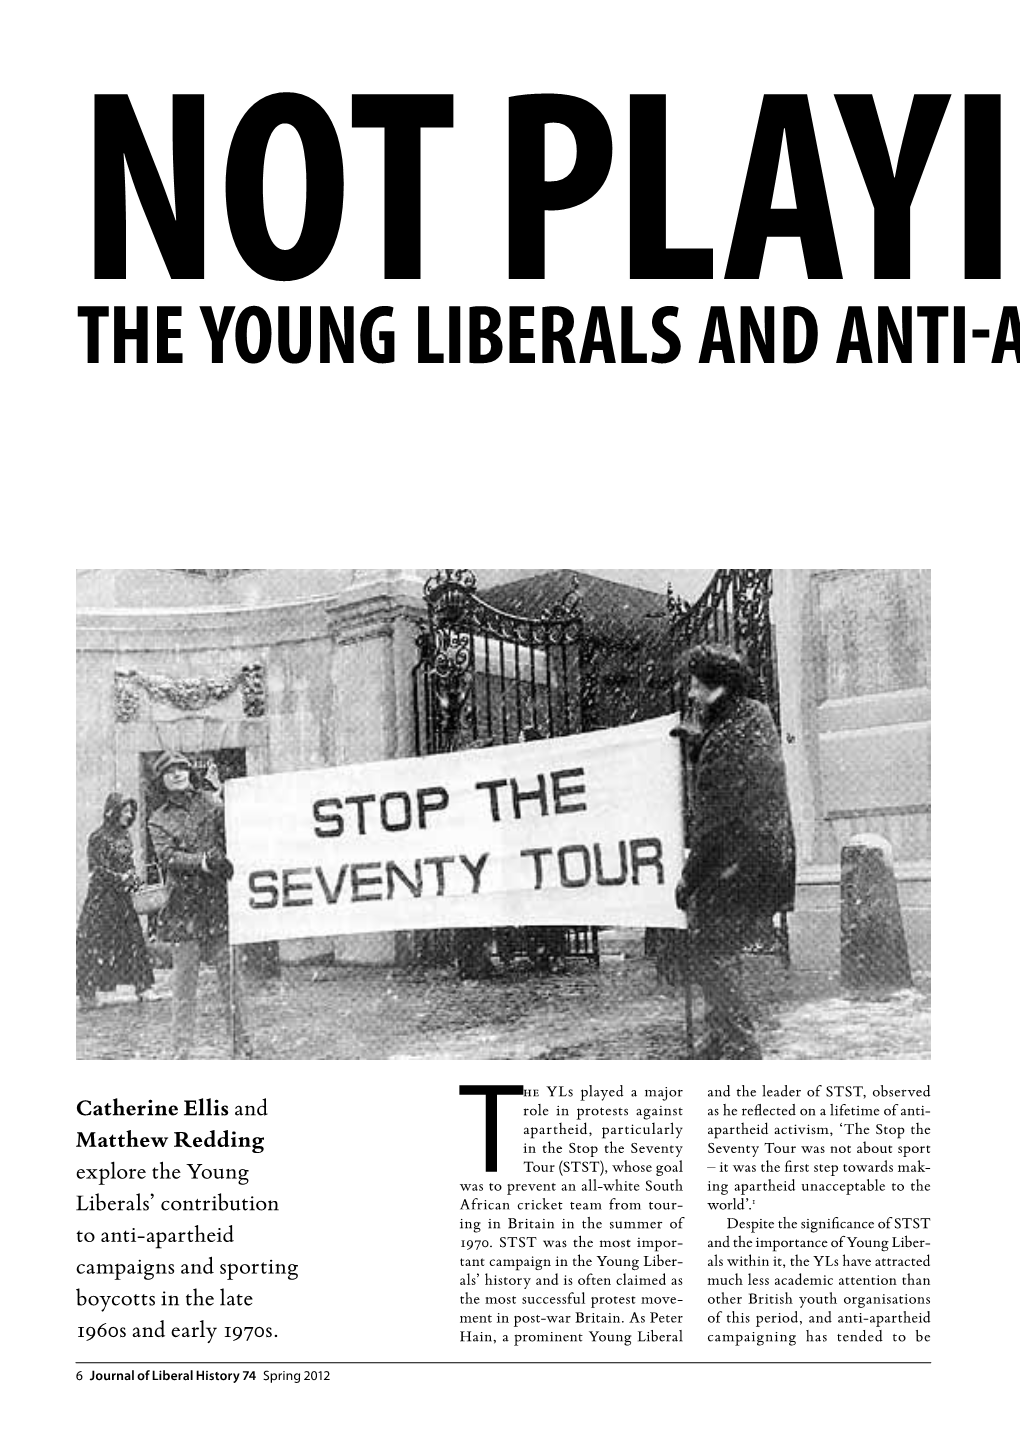 The Young Liberals and Anti-Apartheid Campaigns, 1968 – 70